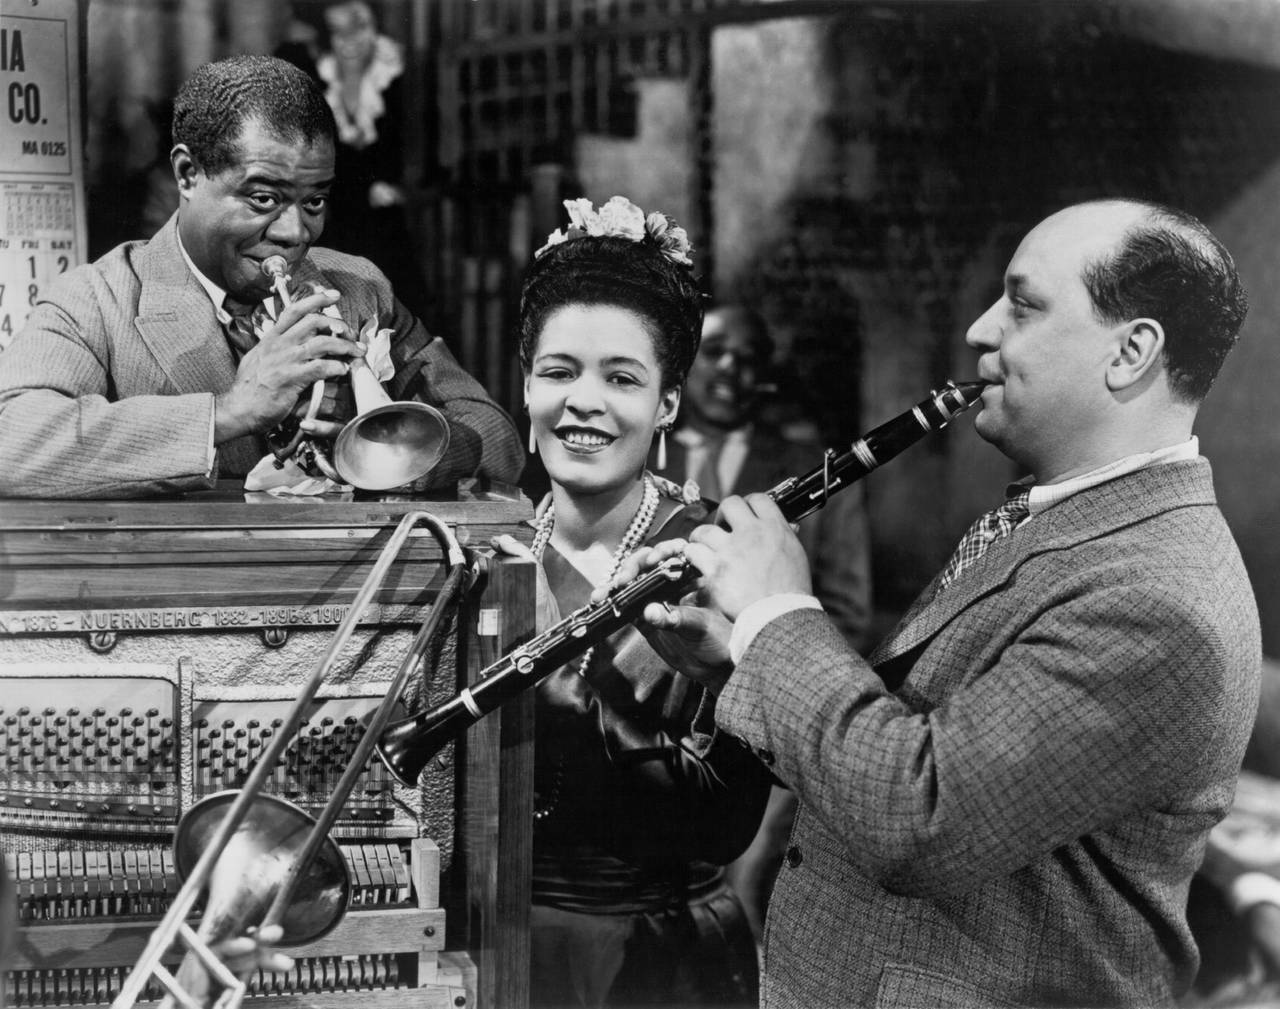 NEW ORLEANS - 1947:  Louis Armstrong (left), Billie Holiday (middle) and Barney Bigard (right) perform on the set of the musical "New Orleans" in 1947 in New Orleans, Louisiana. Billie Holiday  Photo by Michael Ochs Archives/Getty Images